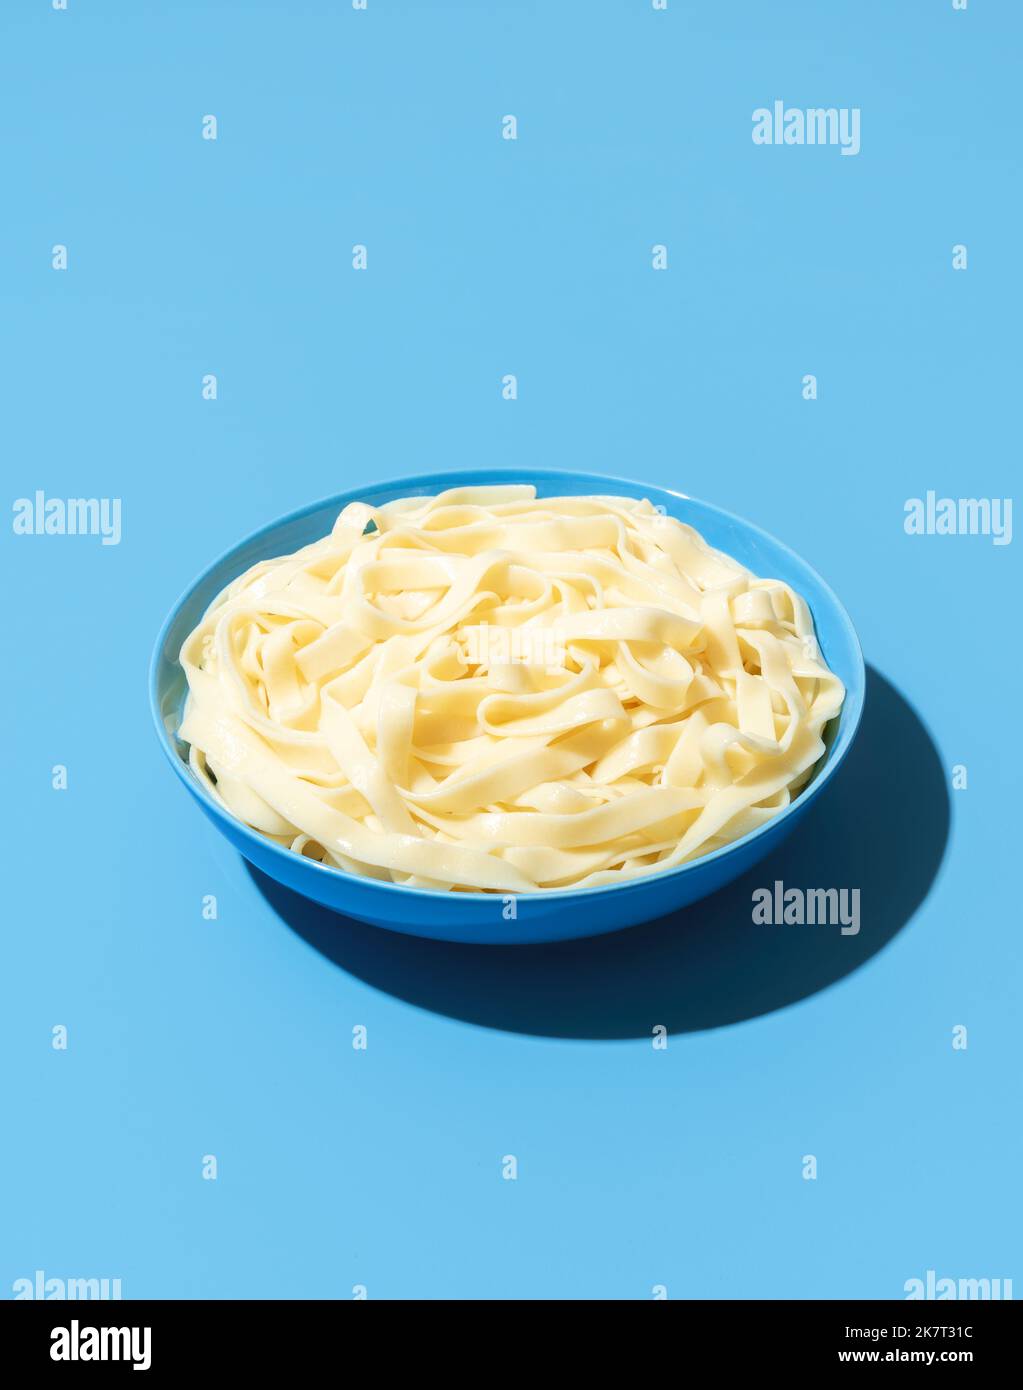 Close-up with a bowl full of boiled tagliatelle pasta isolated on a blue background. Bowl with plain noodles minimalist on a colorful table Stock Photo